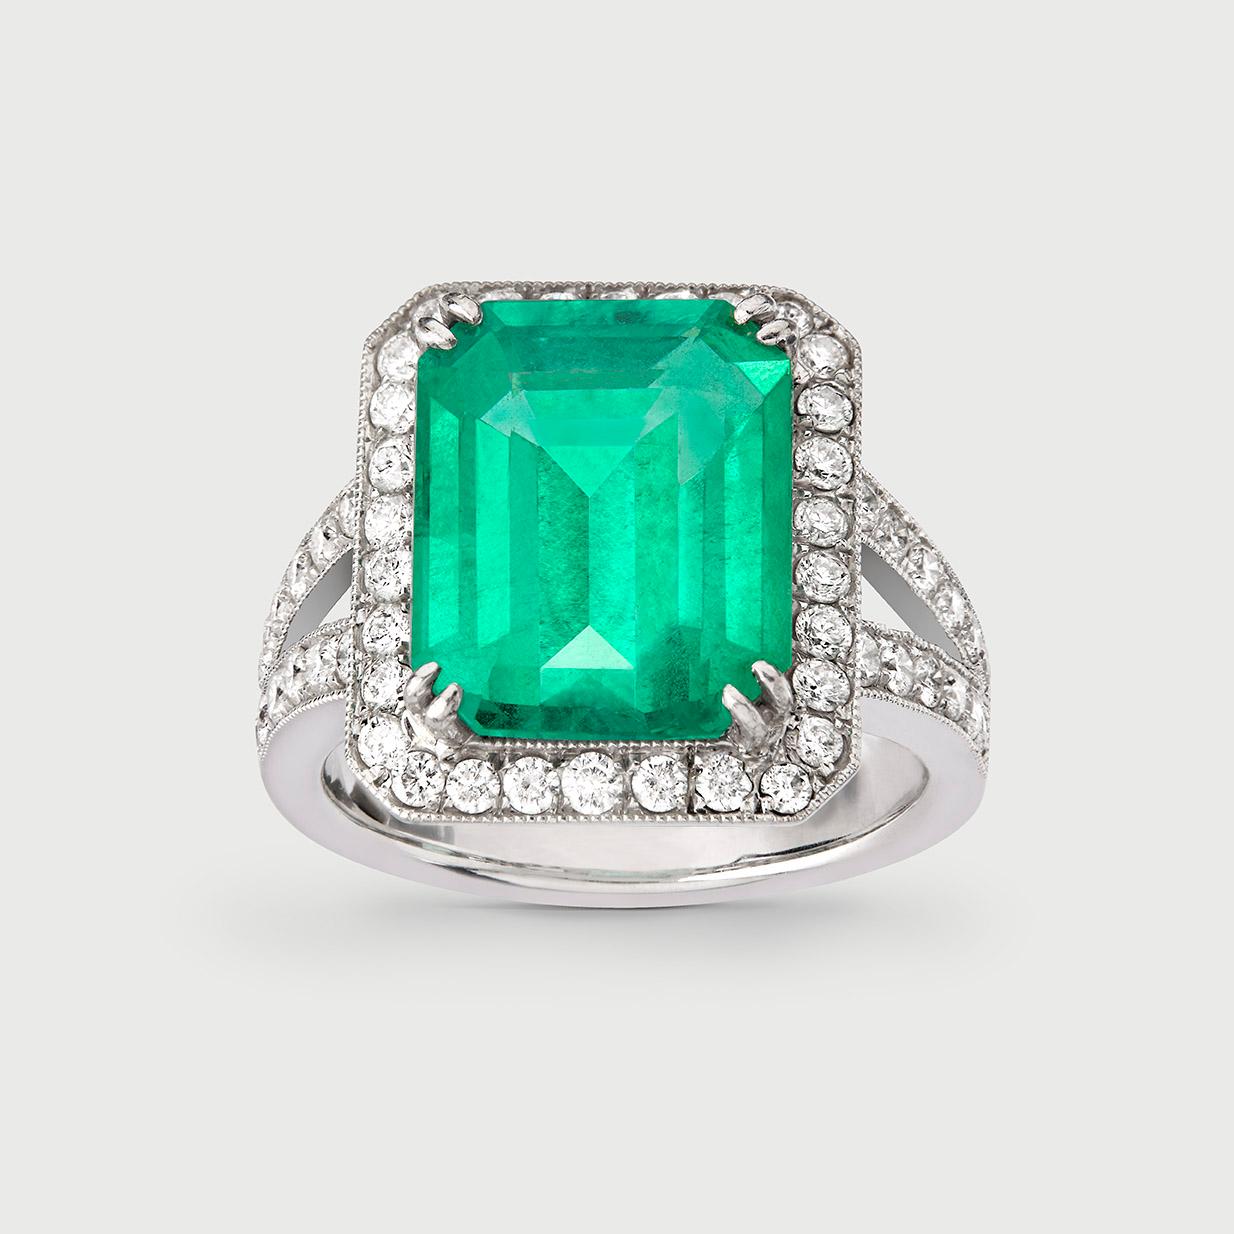 This 6 carats Colombian Emerald and Diamond Cocktail Ring is handcrafted in 18K white gold and made in Italy. 

Gemstones are natural and not treated. Emerald certificate is available upon request.  This ring is only made to order. 
It can be